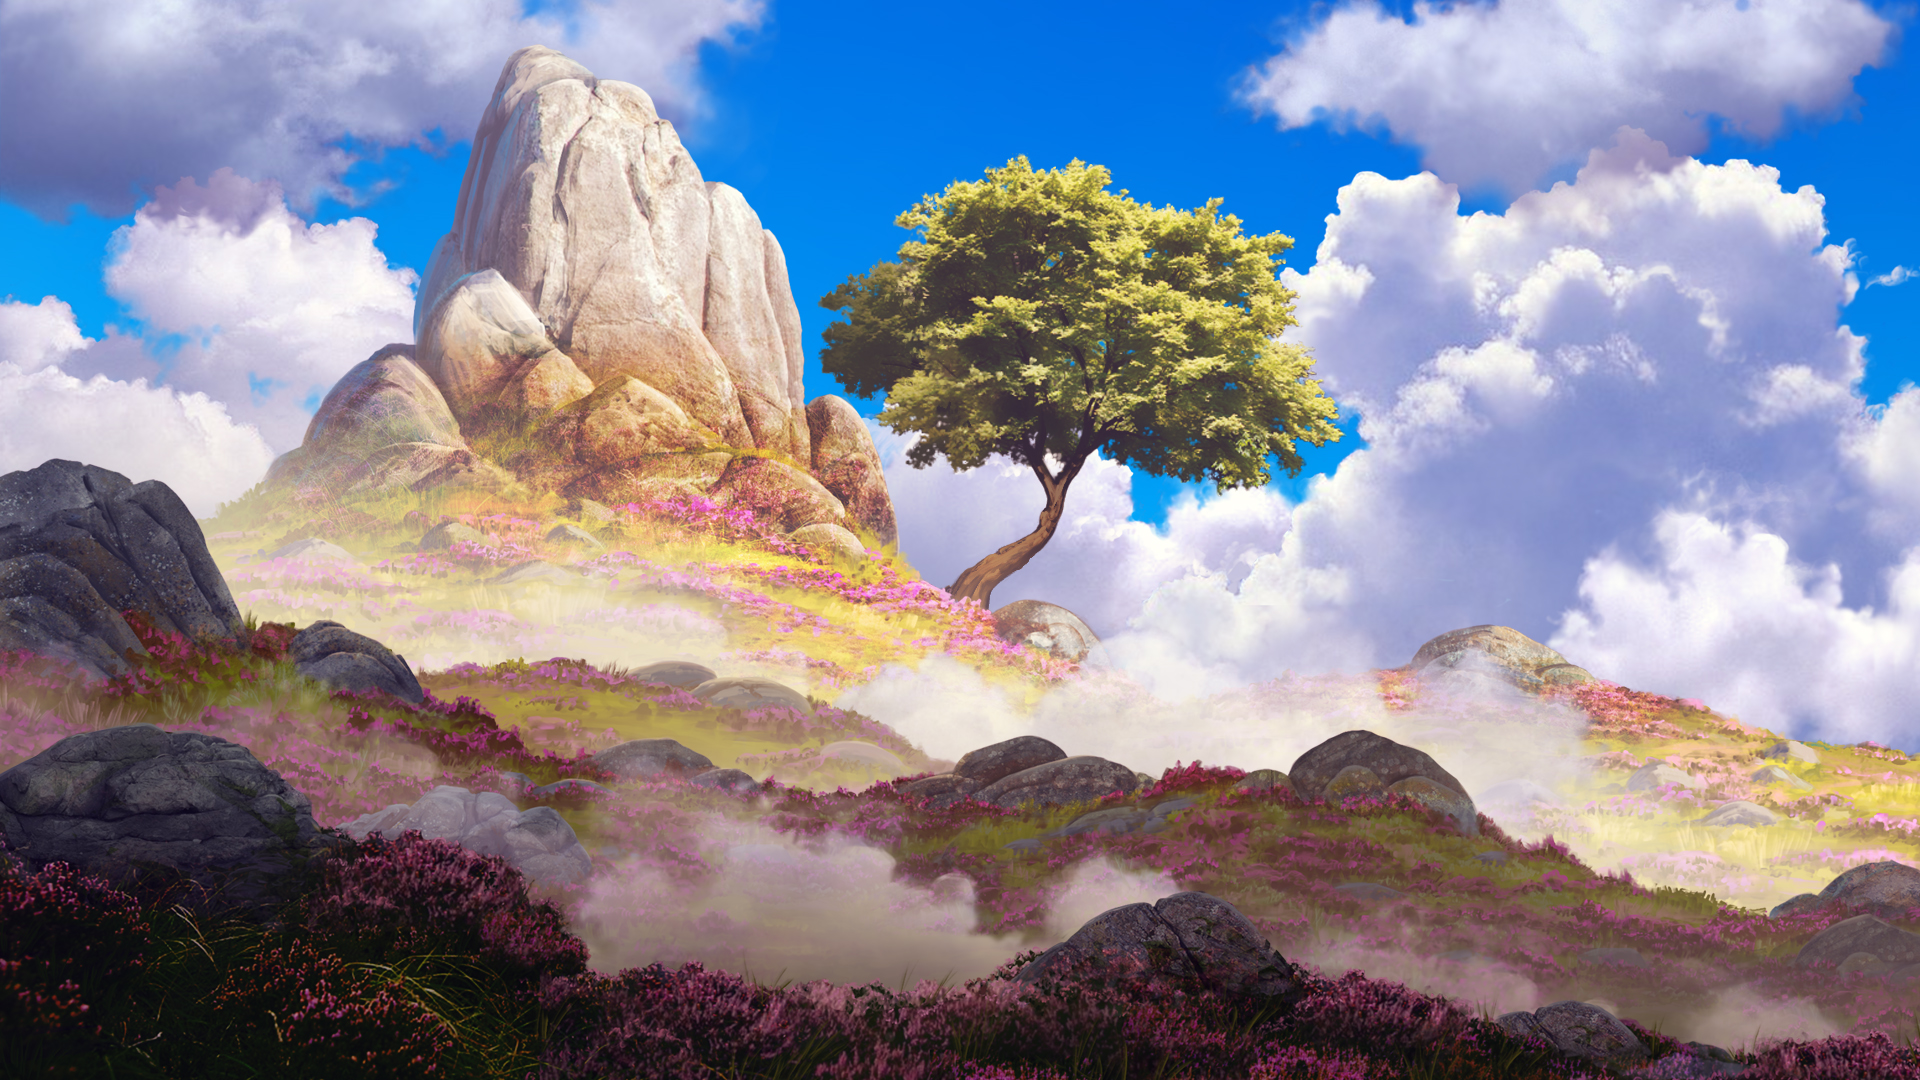 Rocks Clouds Sky Flowers Trees Fog Nature Daniel Conway Outdoors Mist 1920x1080